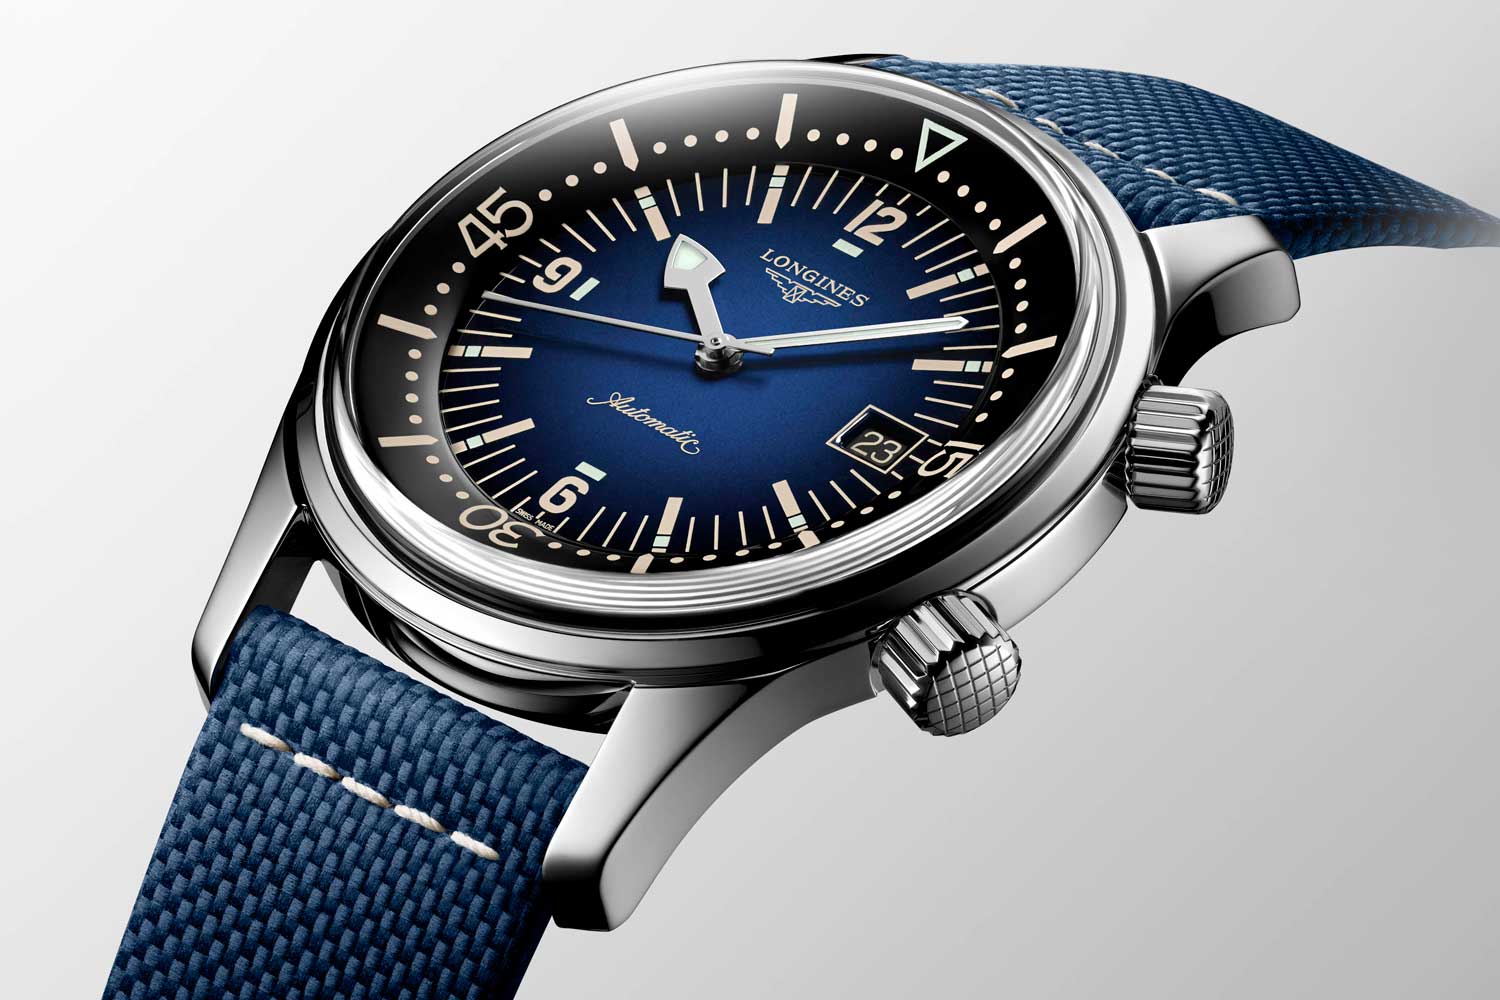 This year, the Legend Diver receives a new blue hue for the dial with luminous hands and square hour tracks.